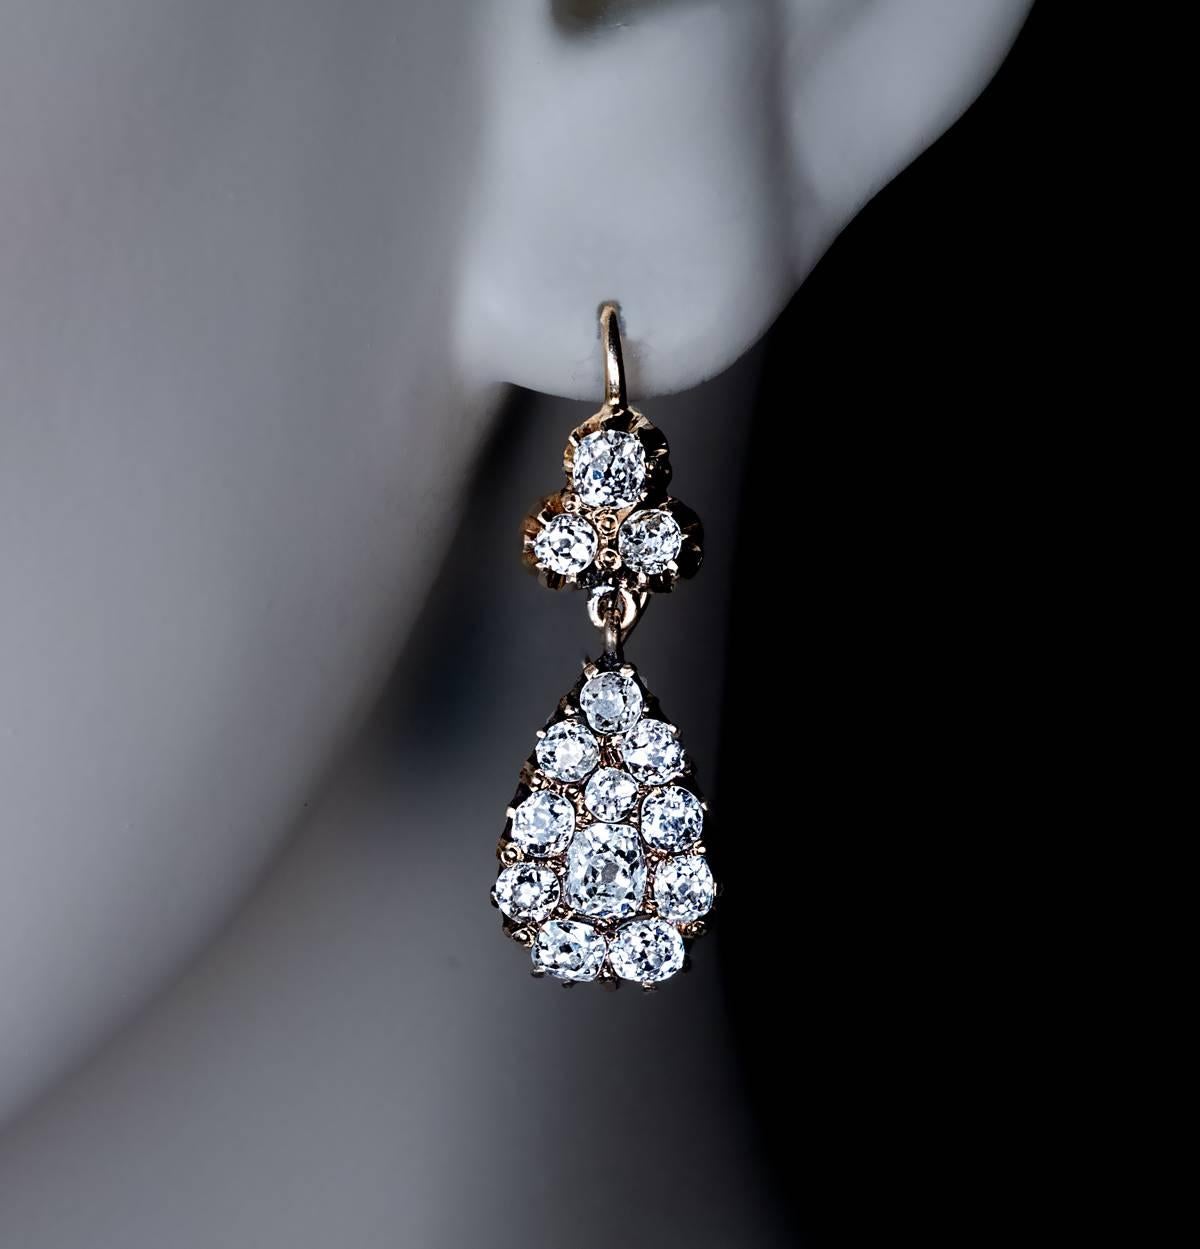 Made in Odessa between 1908 and 1917

The earrings are crafted in 14K gold and prong set with bright white (F-G color) and sparkling antique cushion cut and old European cut diamonds.

Estimated total diamond weight 3 carats.

Marked with 56